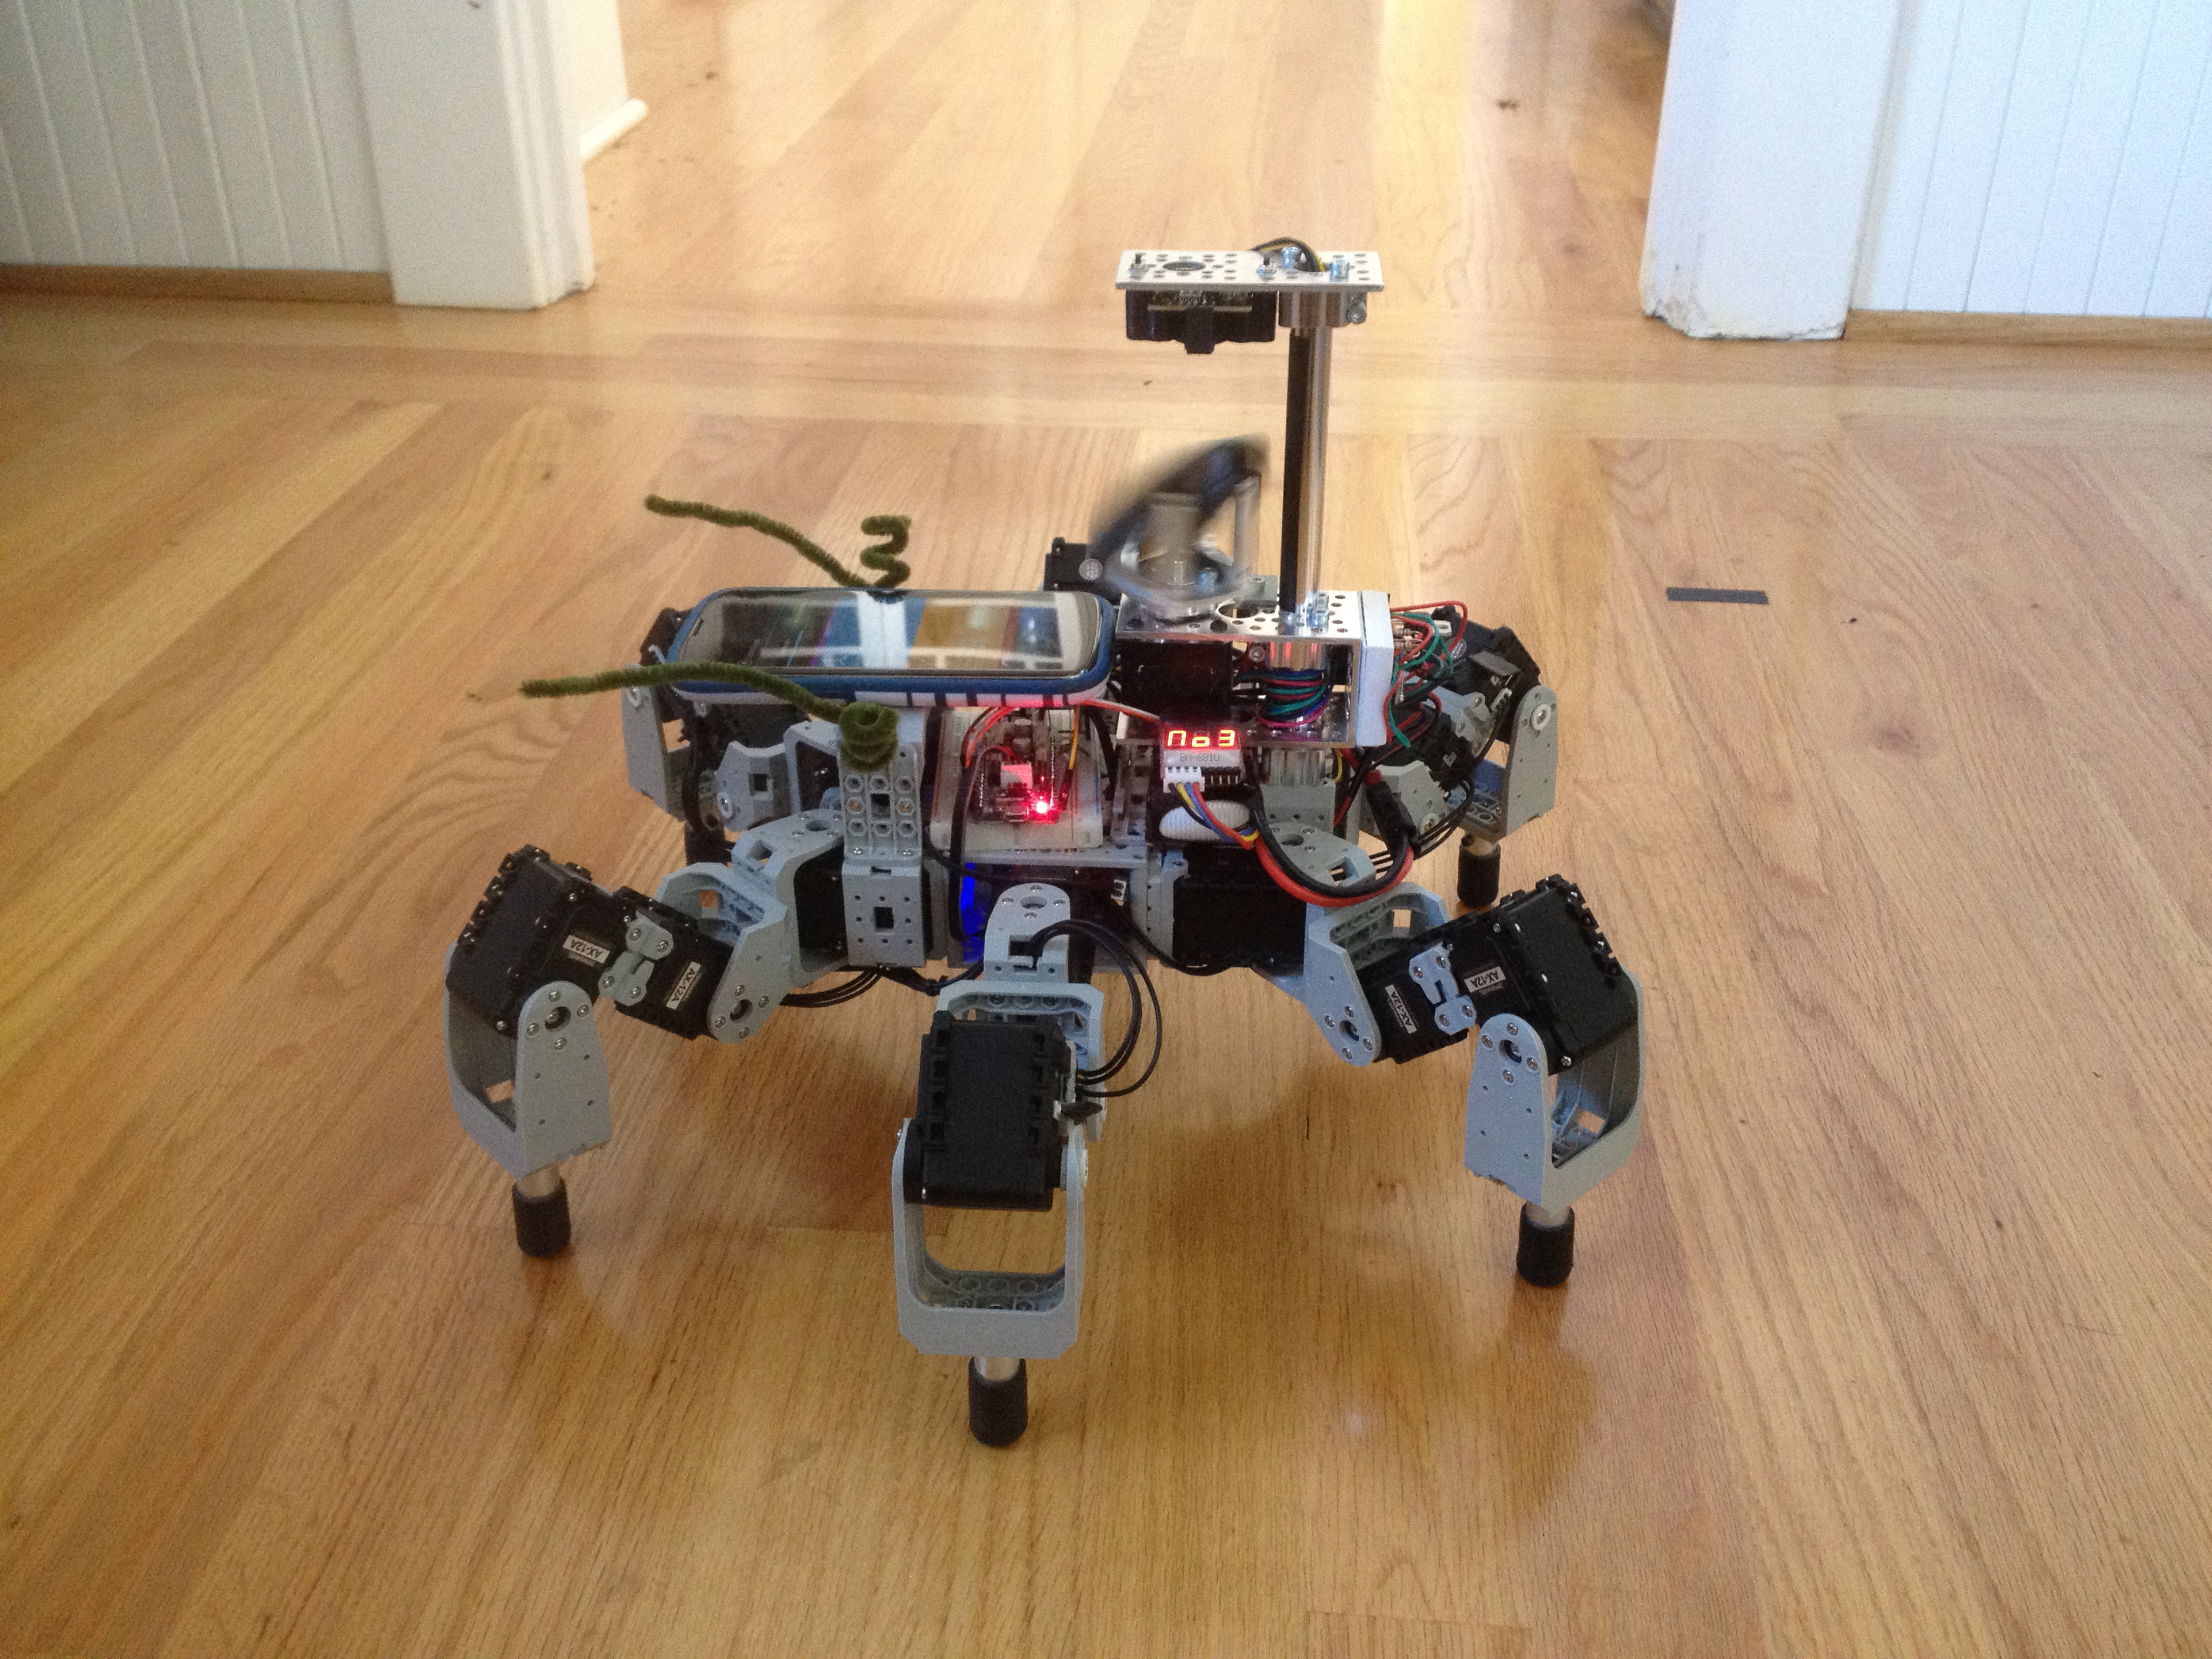 Rhoeby the Navigation-Capable Hexapod